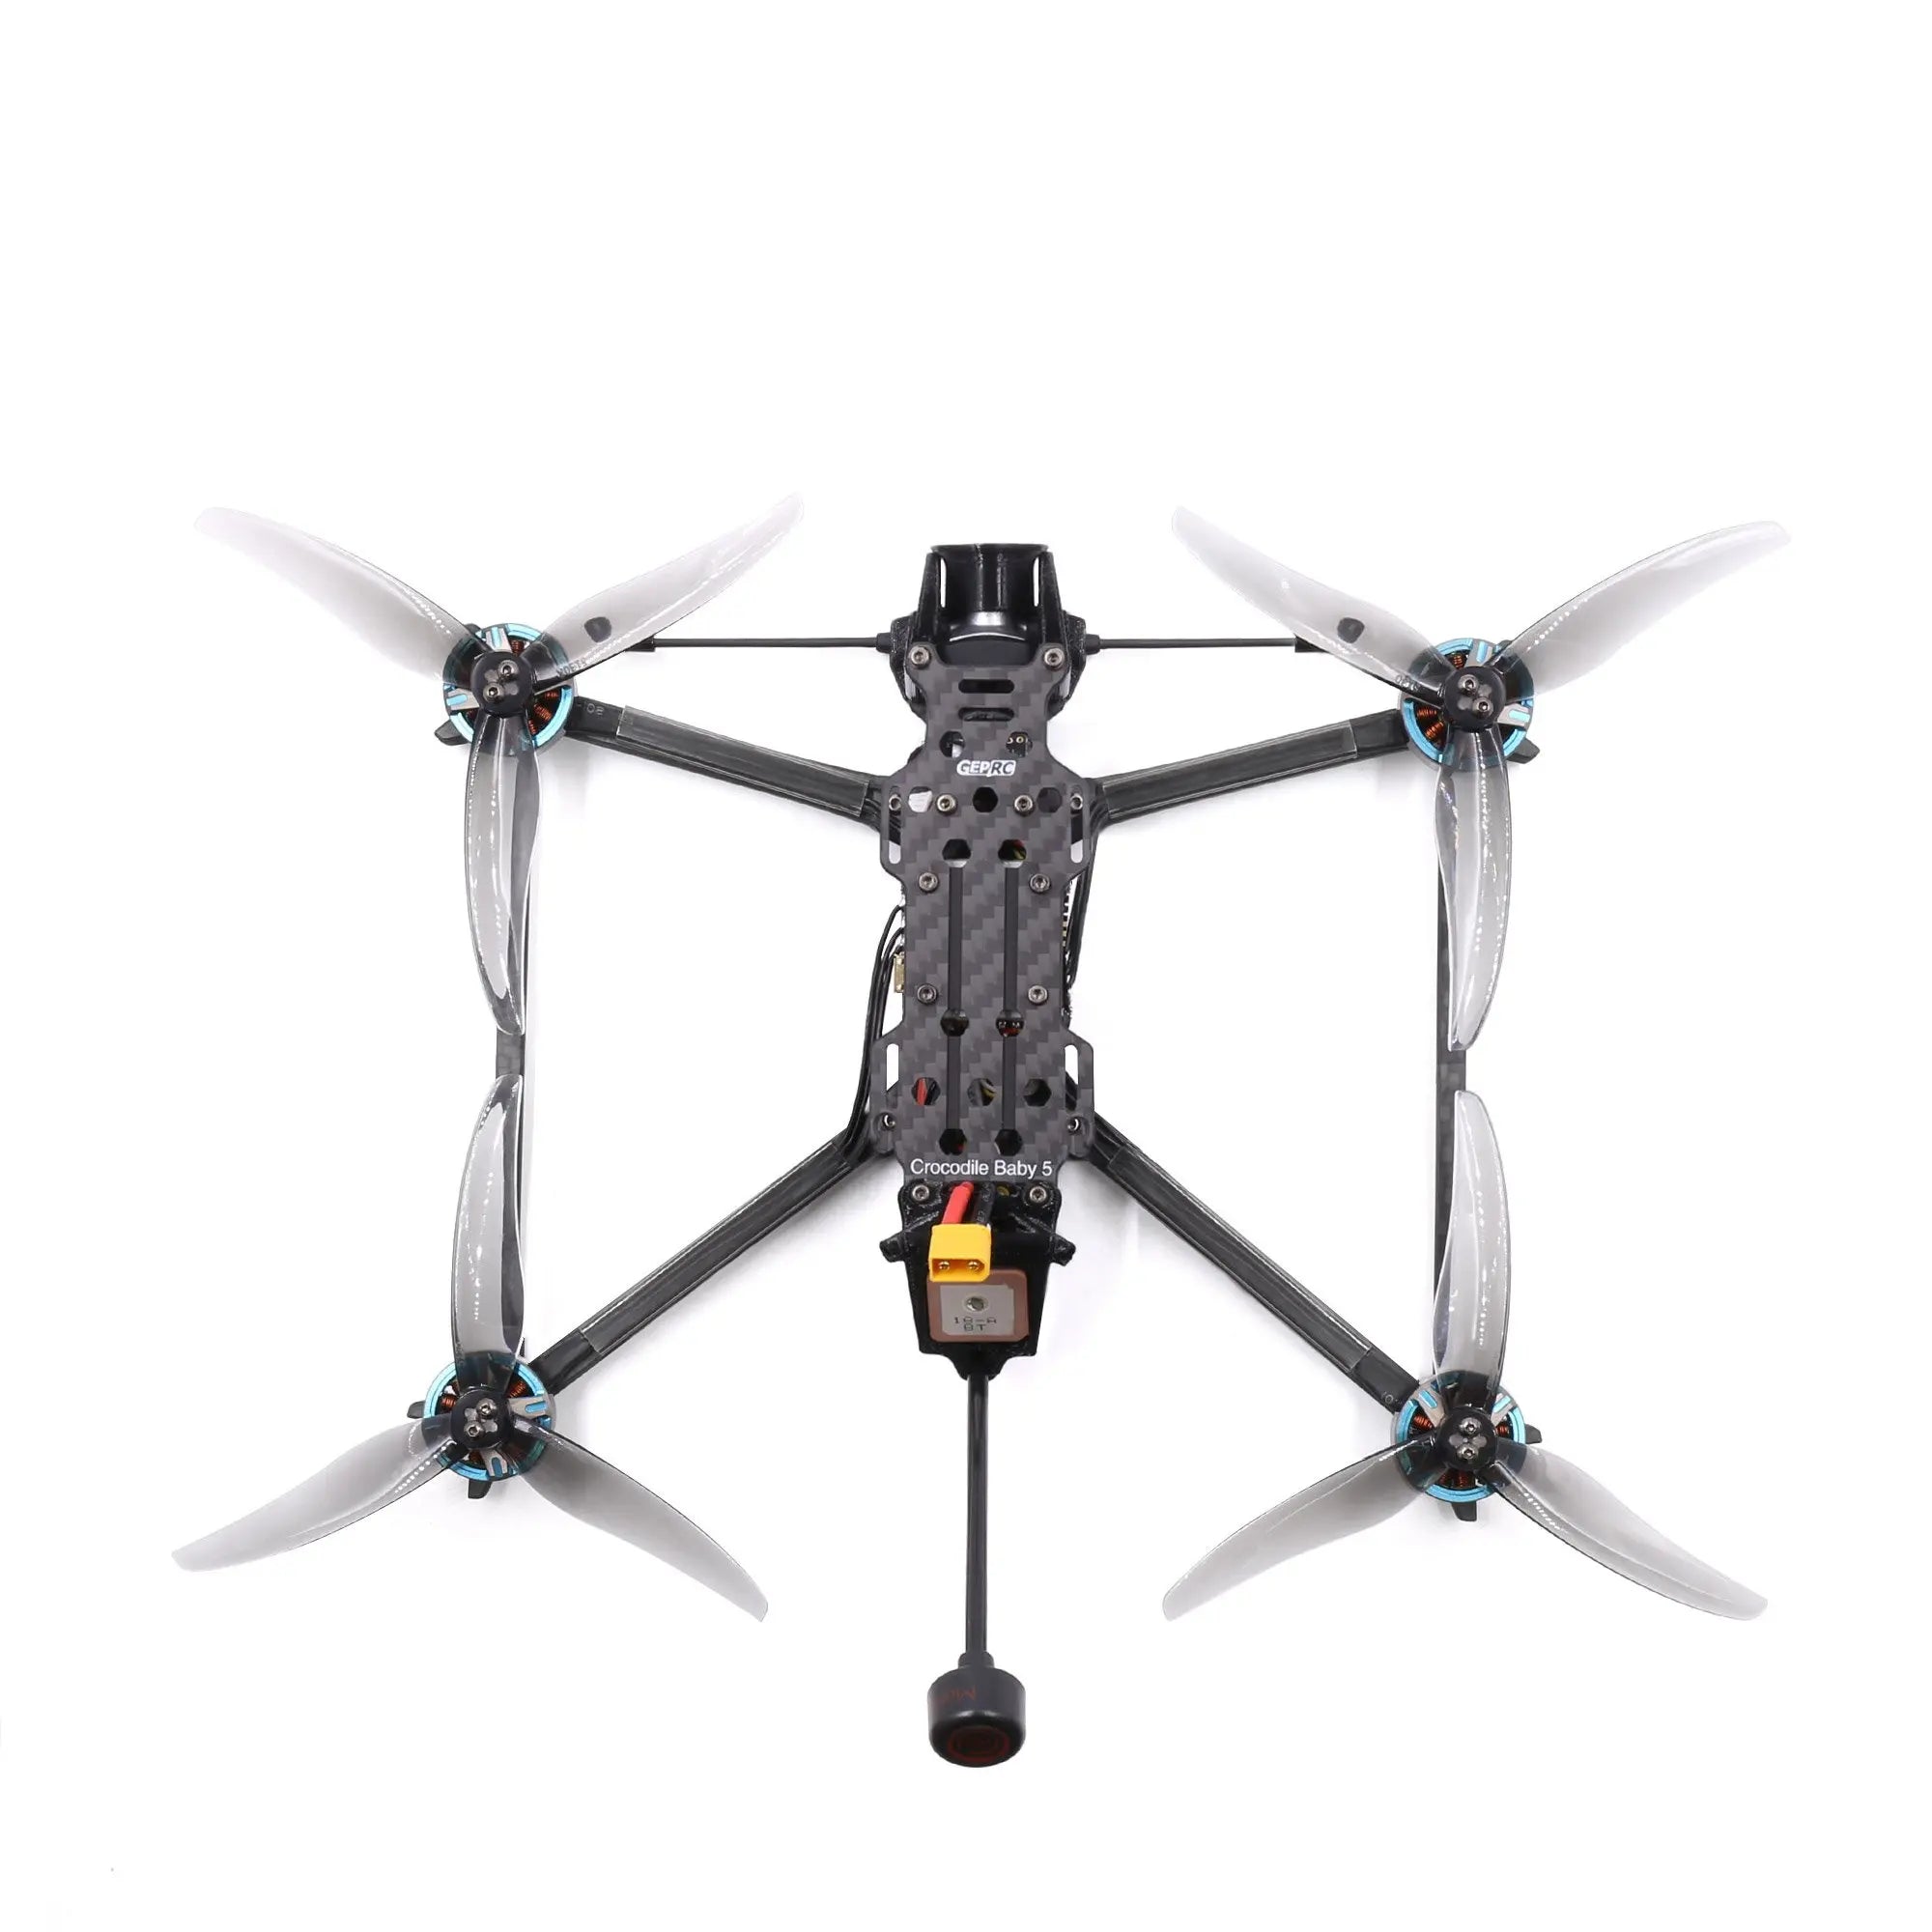 GEPRC Crocodile5 Baby FPV Drone, the drone utilizes a robust flight controller that ensures stable flight characteristics .